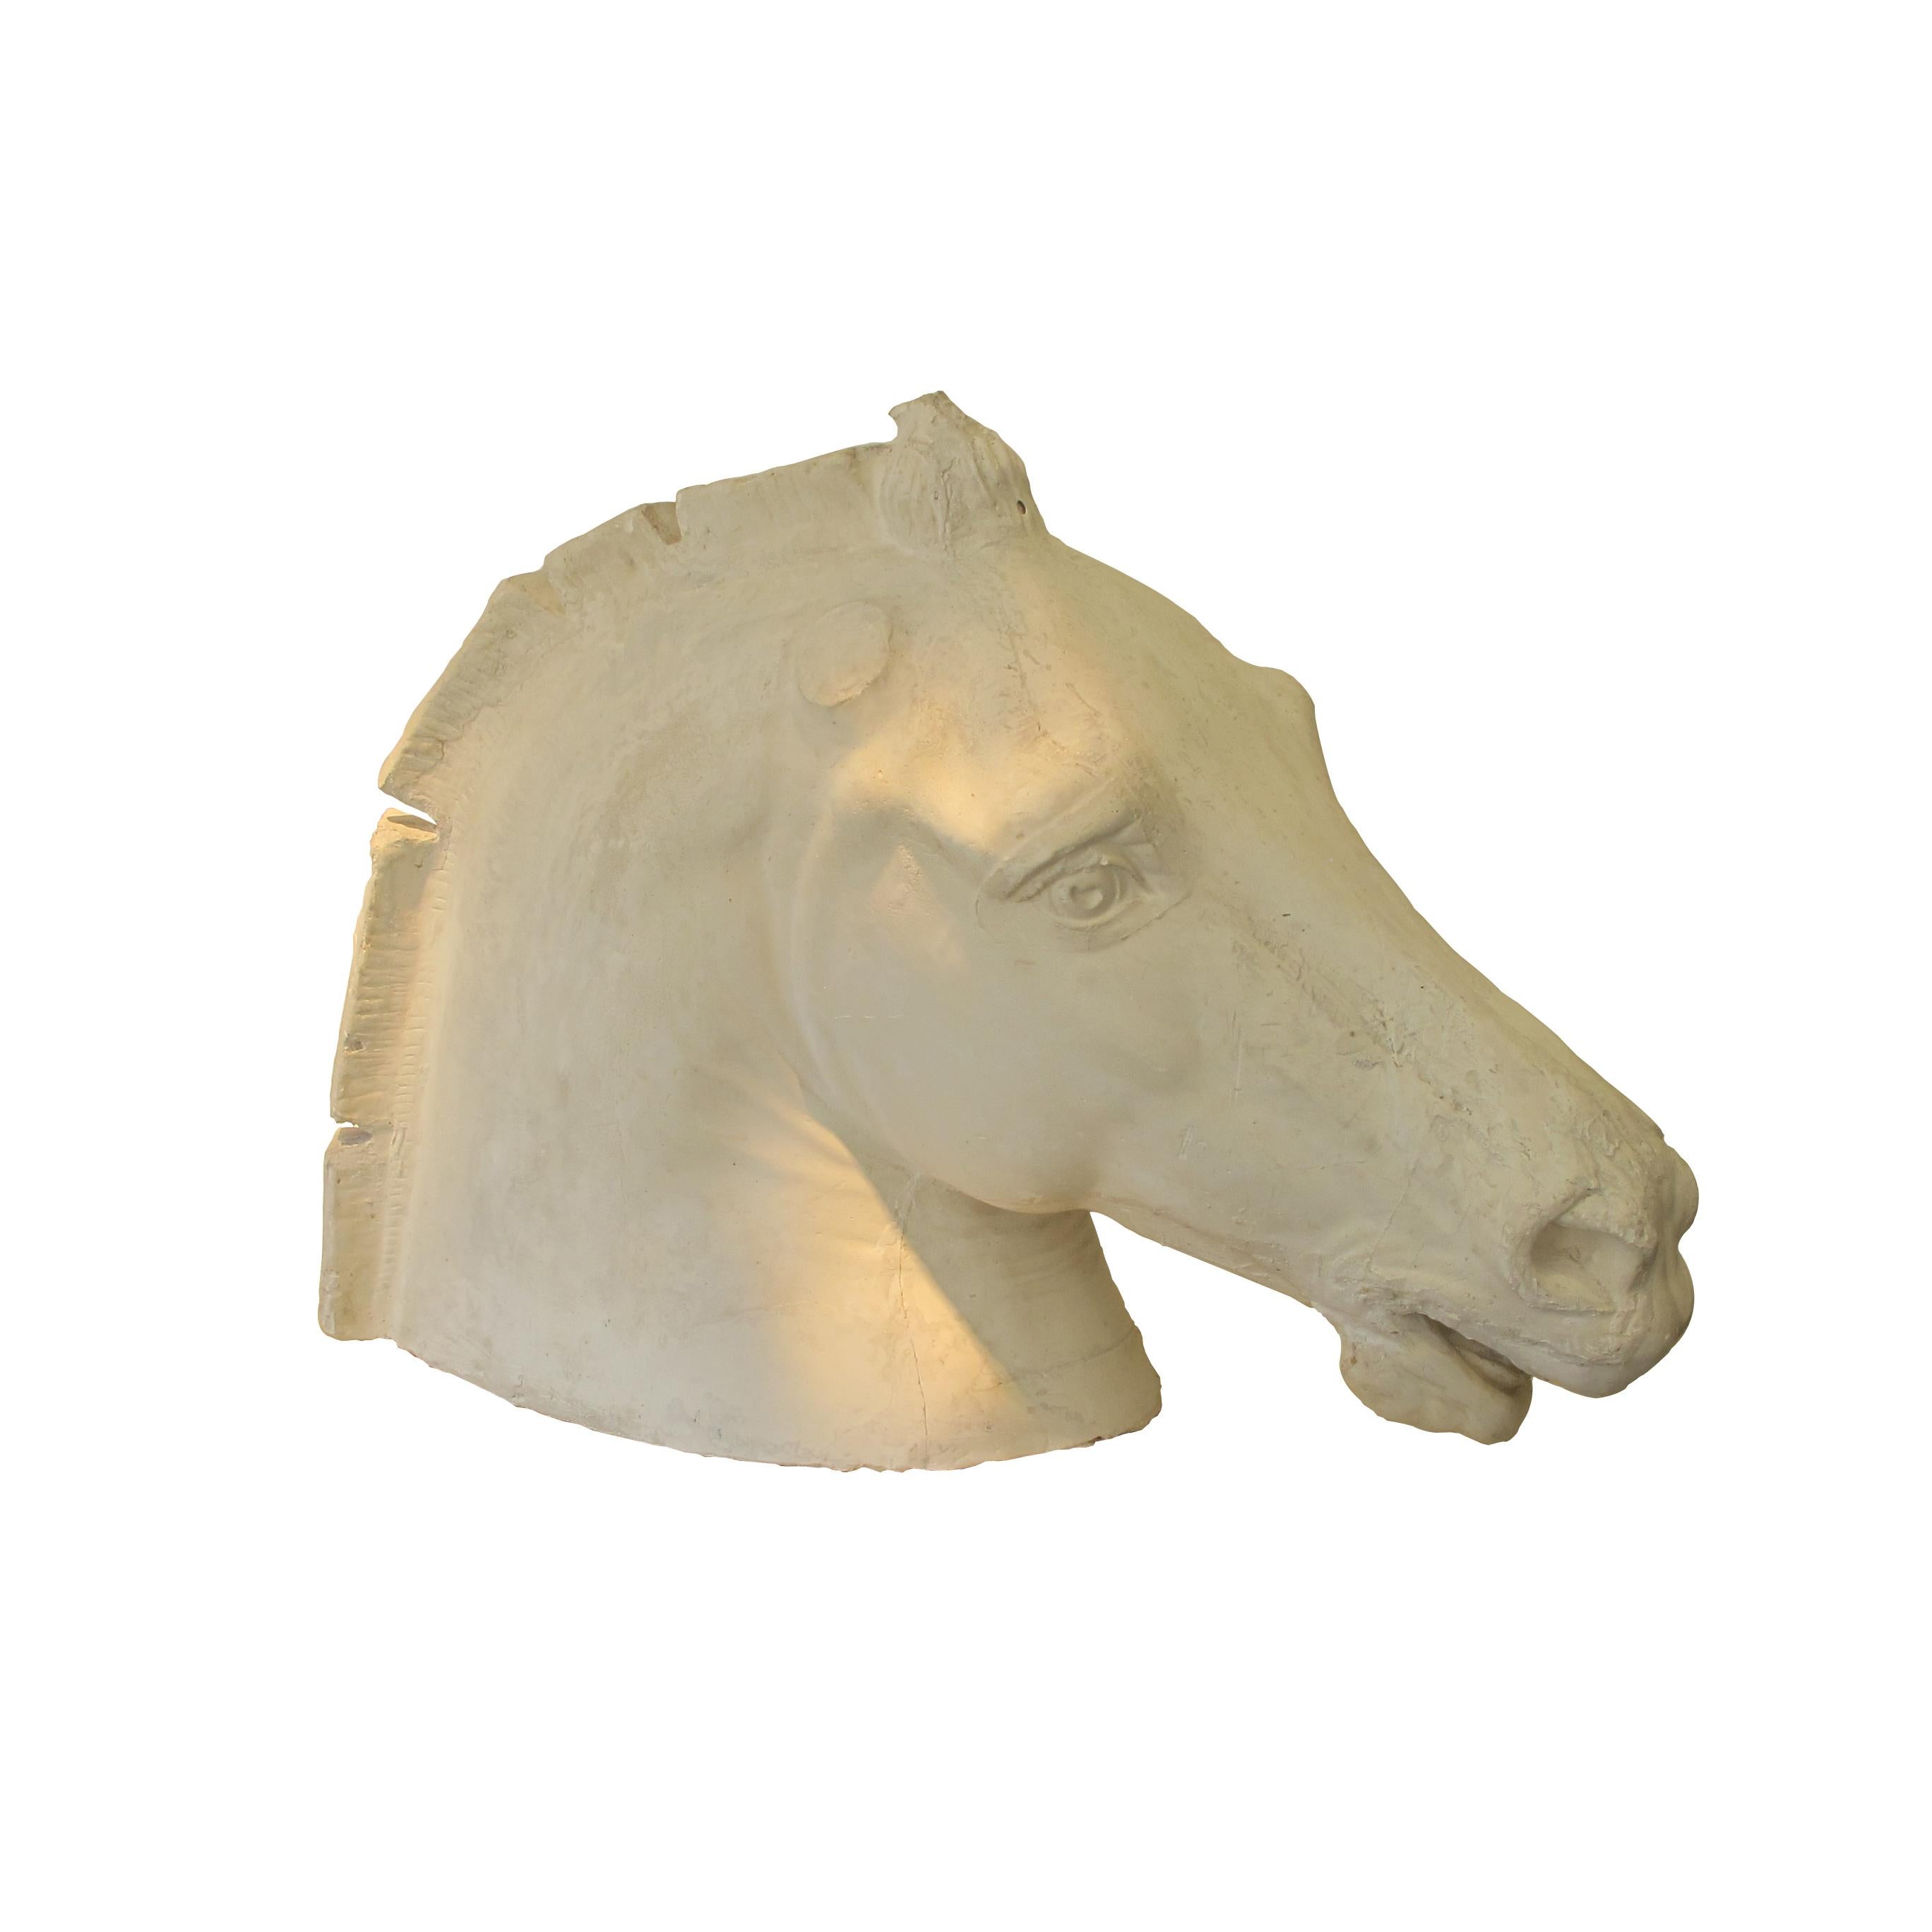 A magnificent colossal plaster horse's head sculpture inspired by the legendary frieze of the Parthenon. The smooth generous and elegant curves are contrasted by a structural mane achieving a truly majestic look, early 20th century, French.